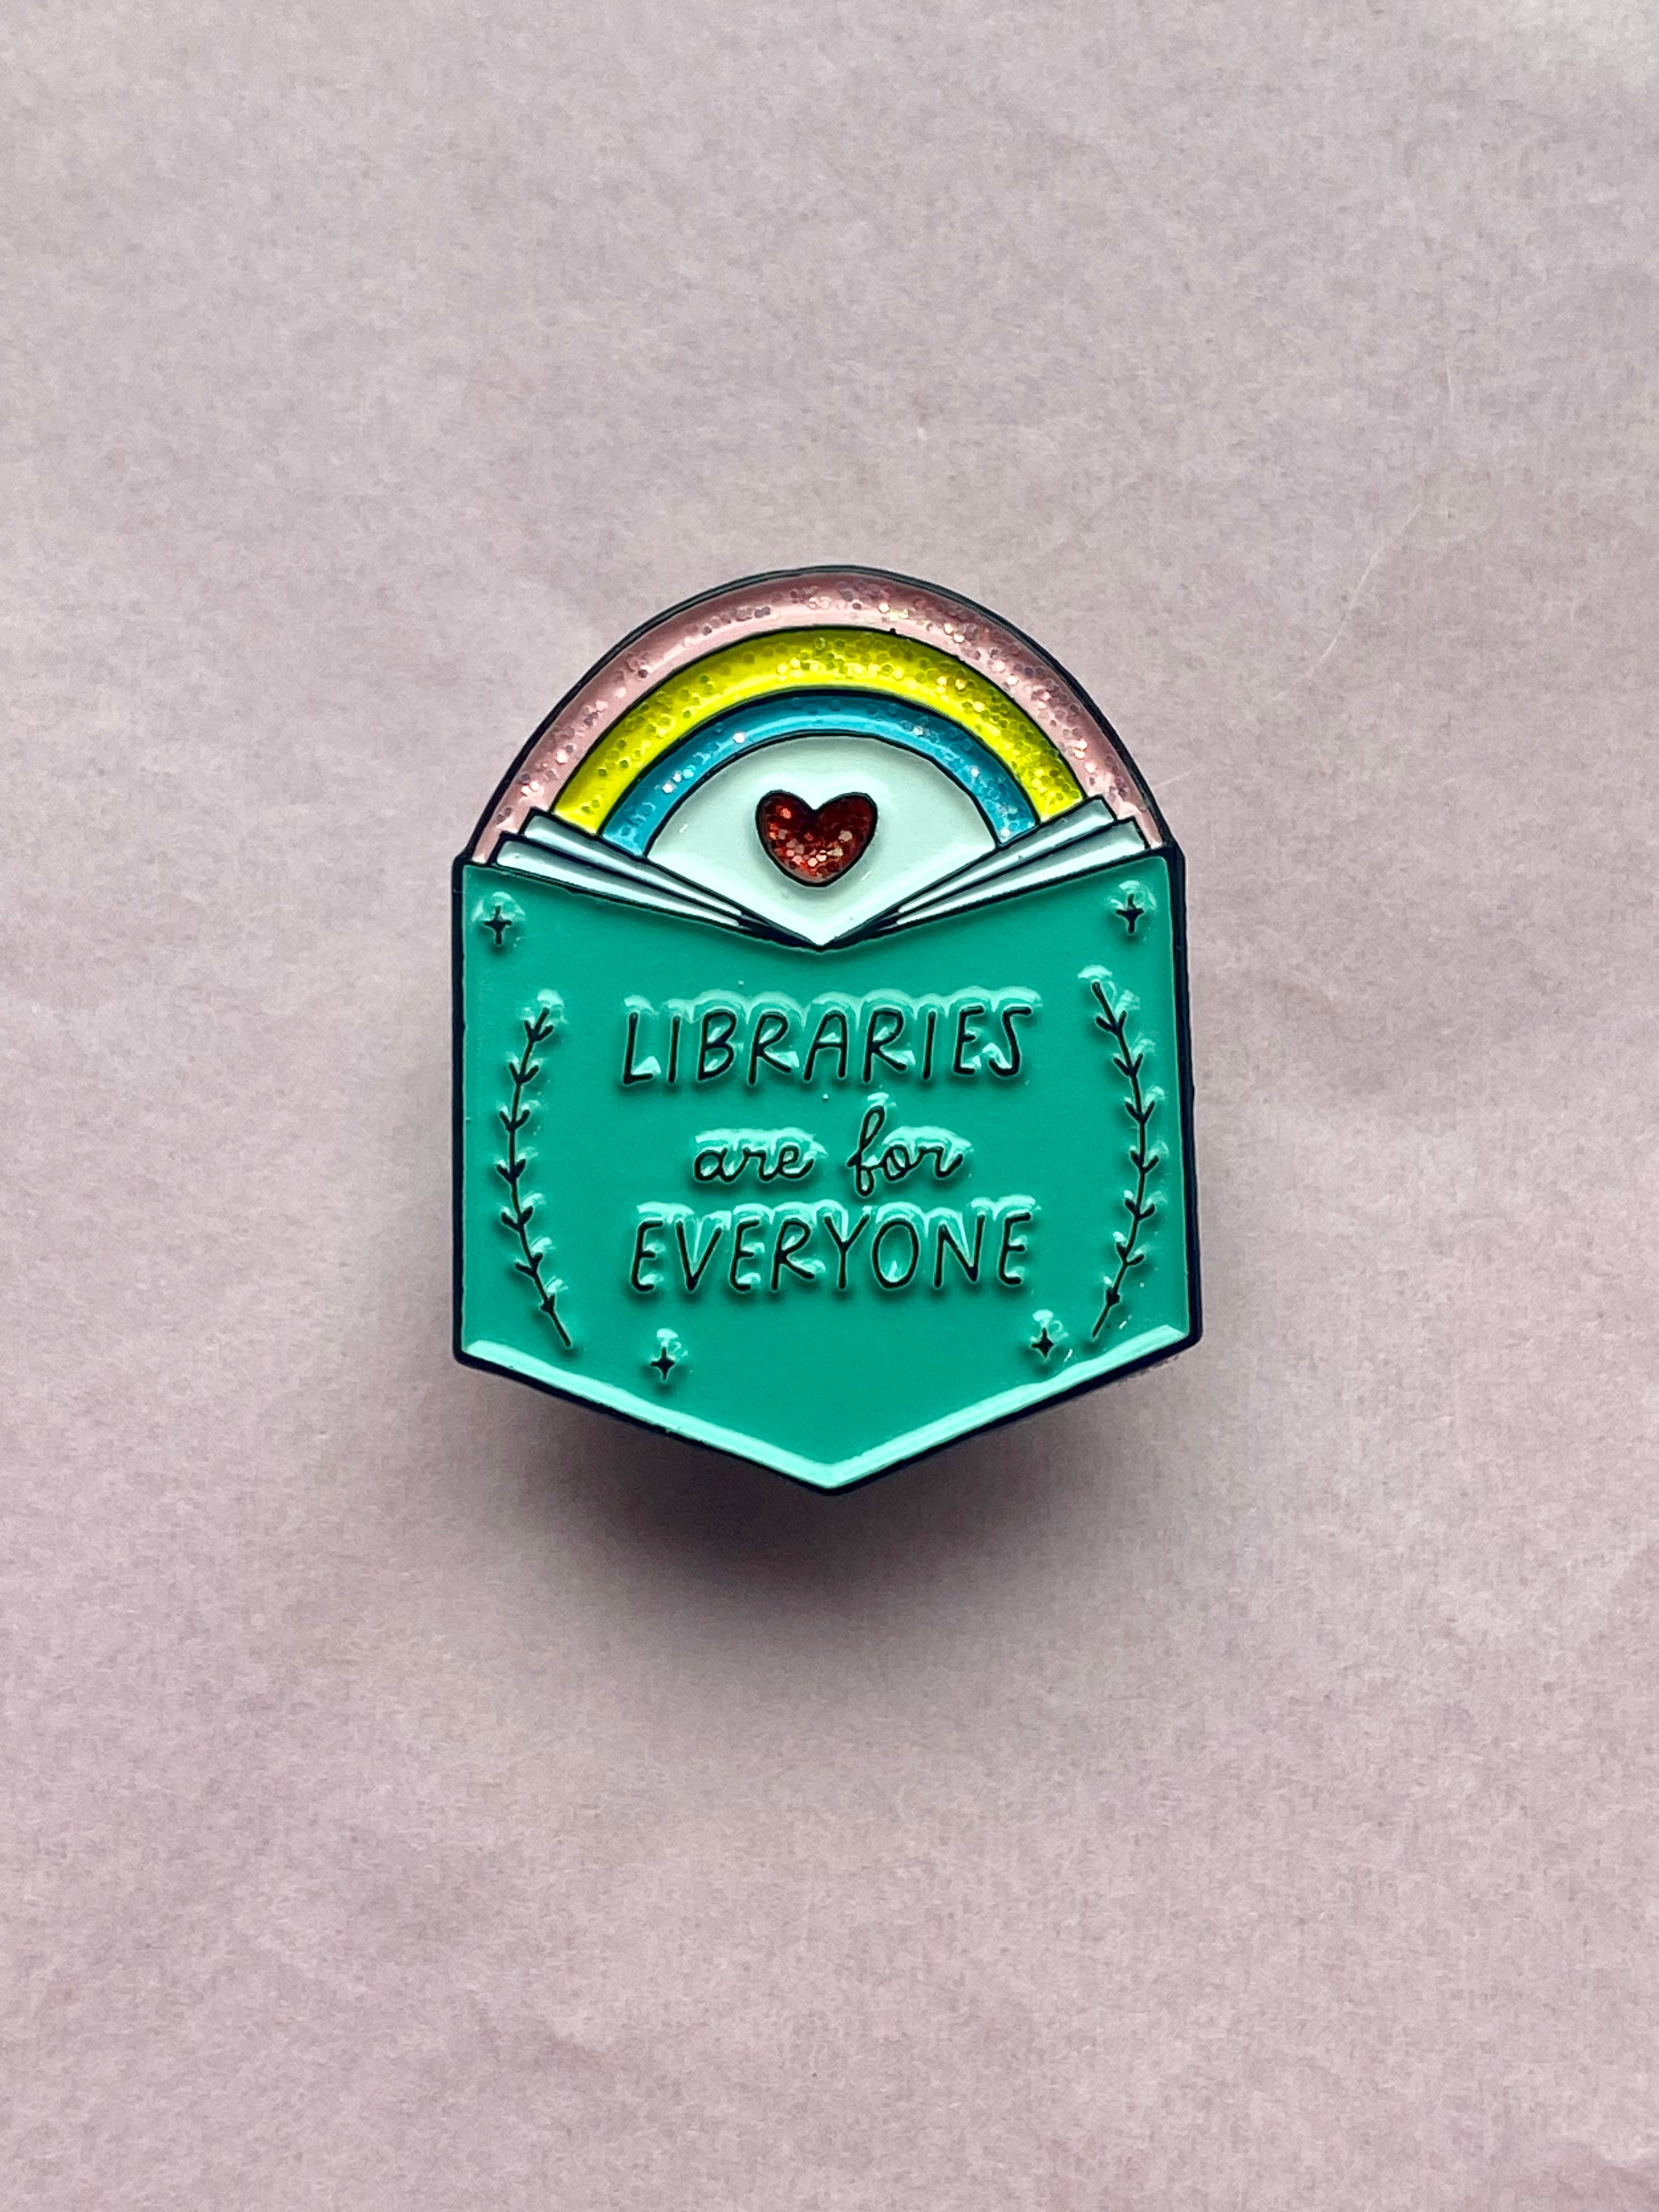 Libraries are for everyone soft enamel pin